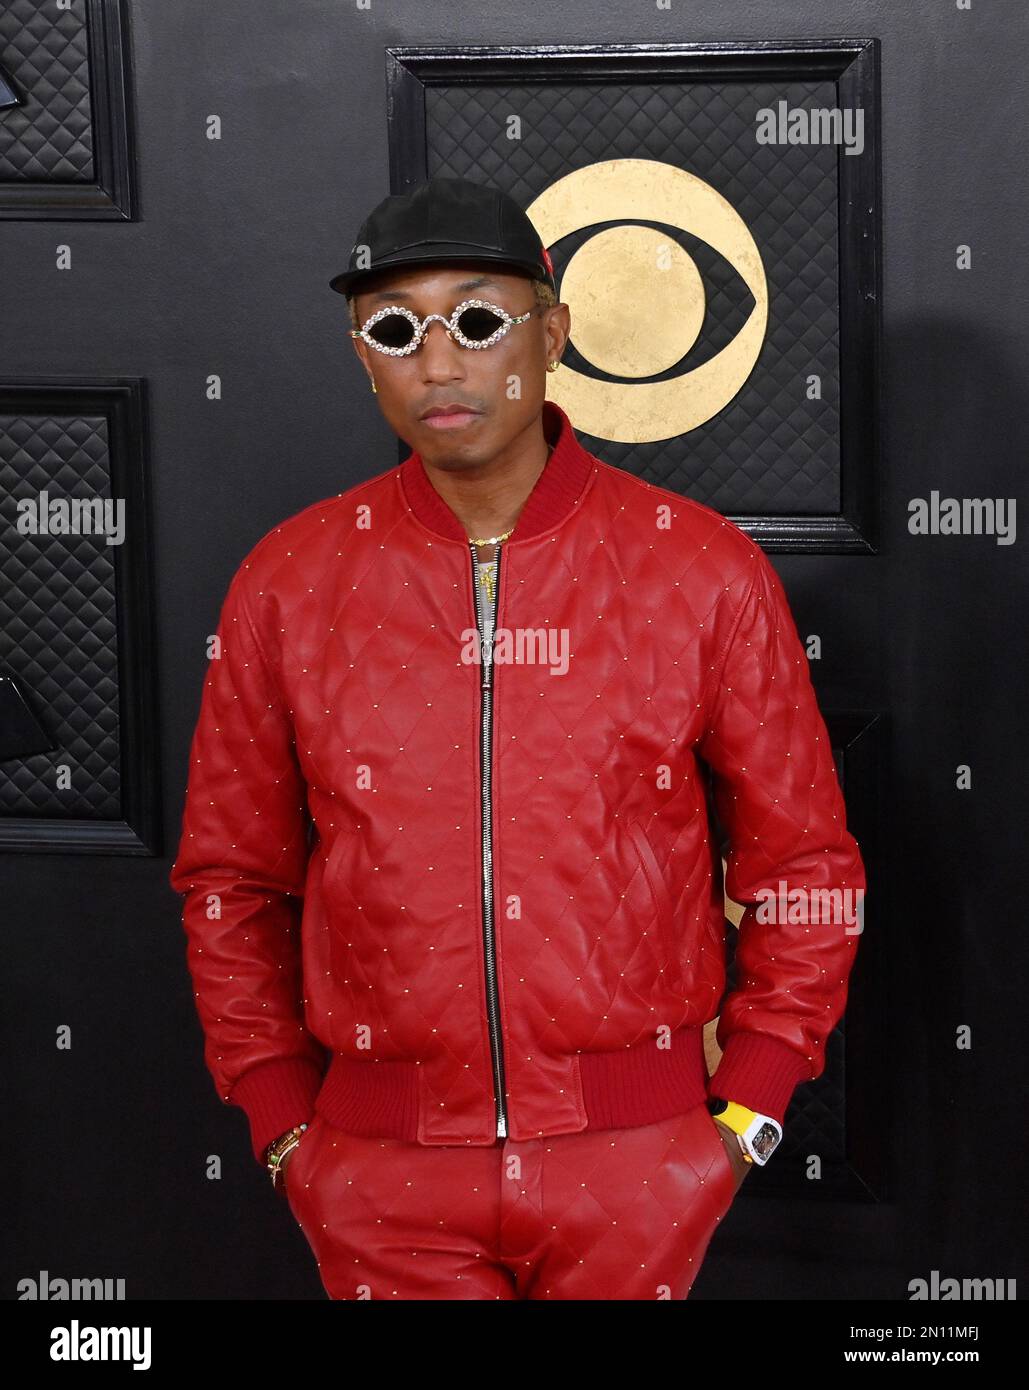 Photo: Pharrell Williams Attends the 65th Grammy Awards in Los